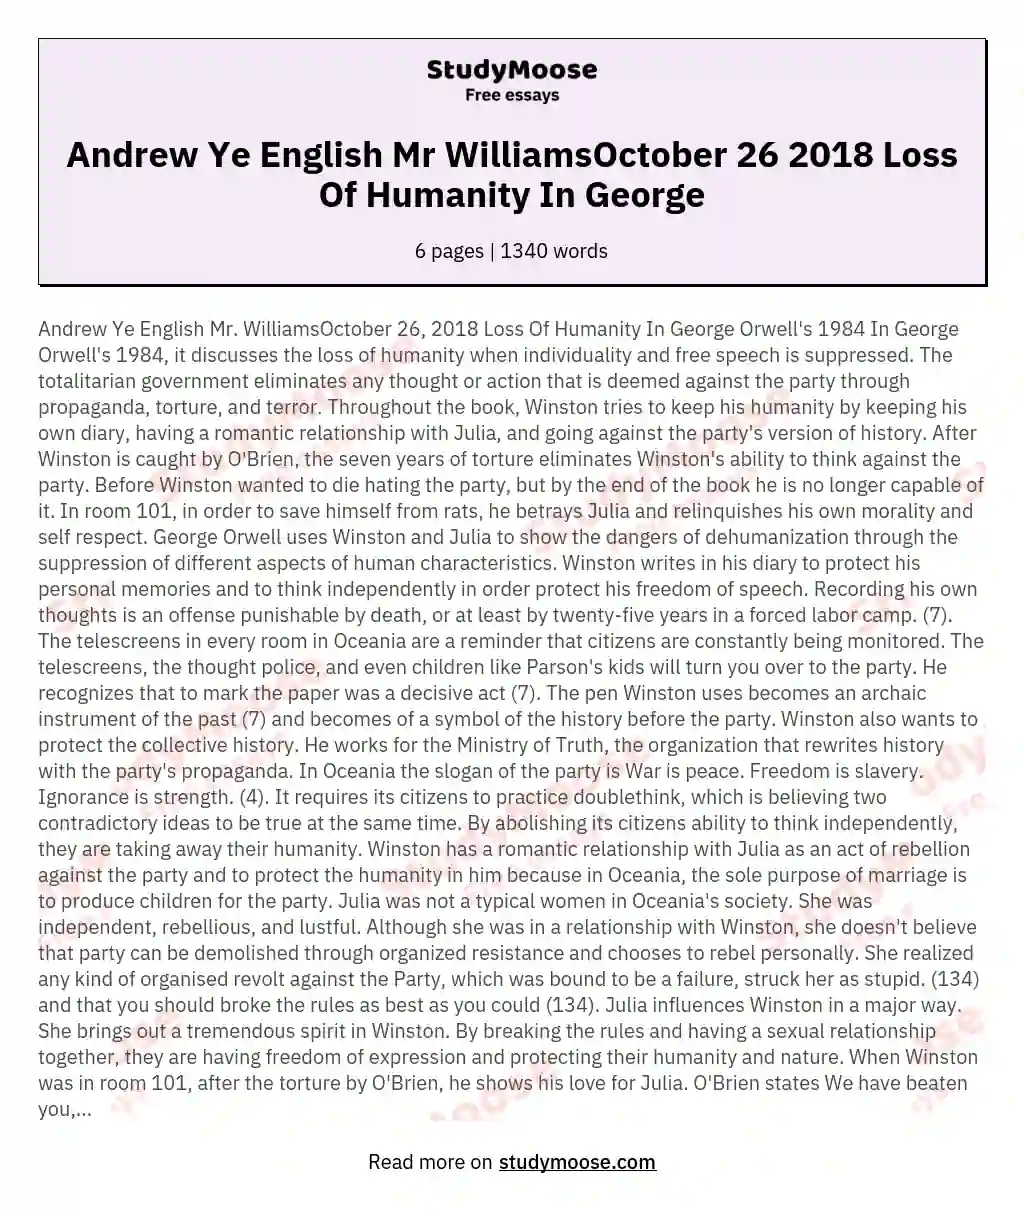 Andrew Ye English Mr WilliamsOctober 26 2018 Loss Of Humanity In George